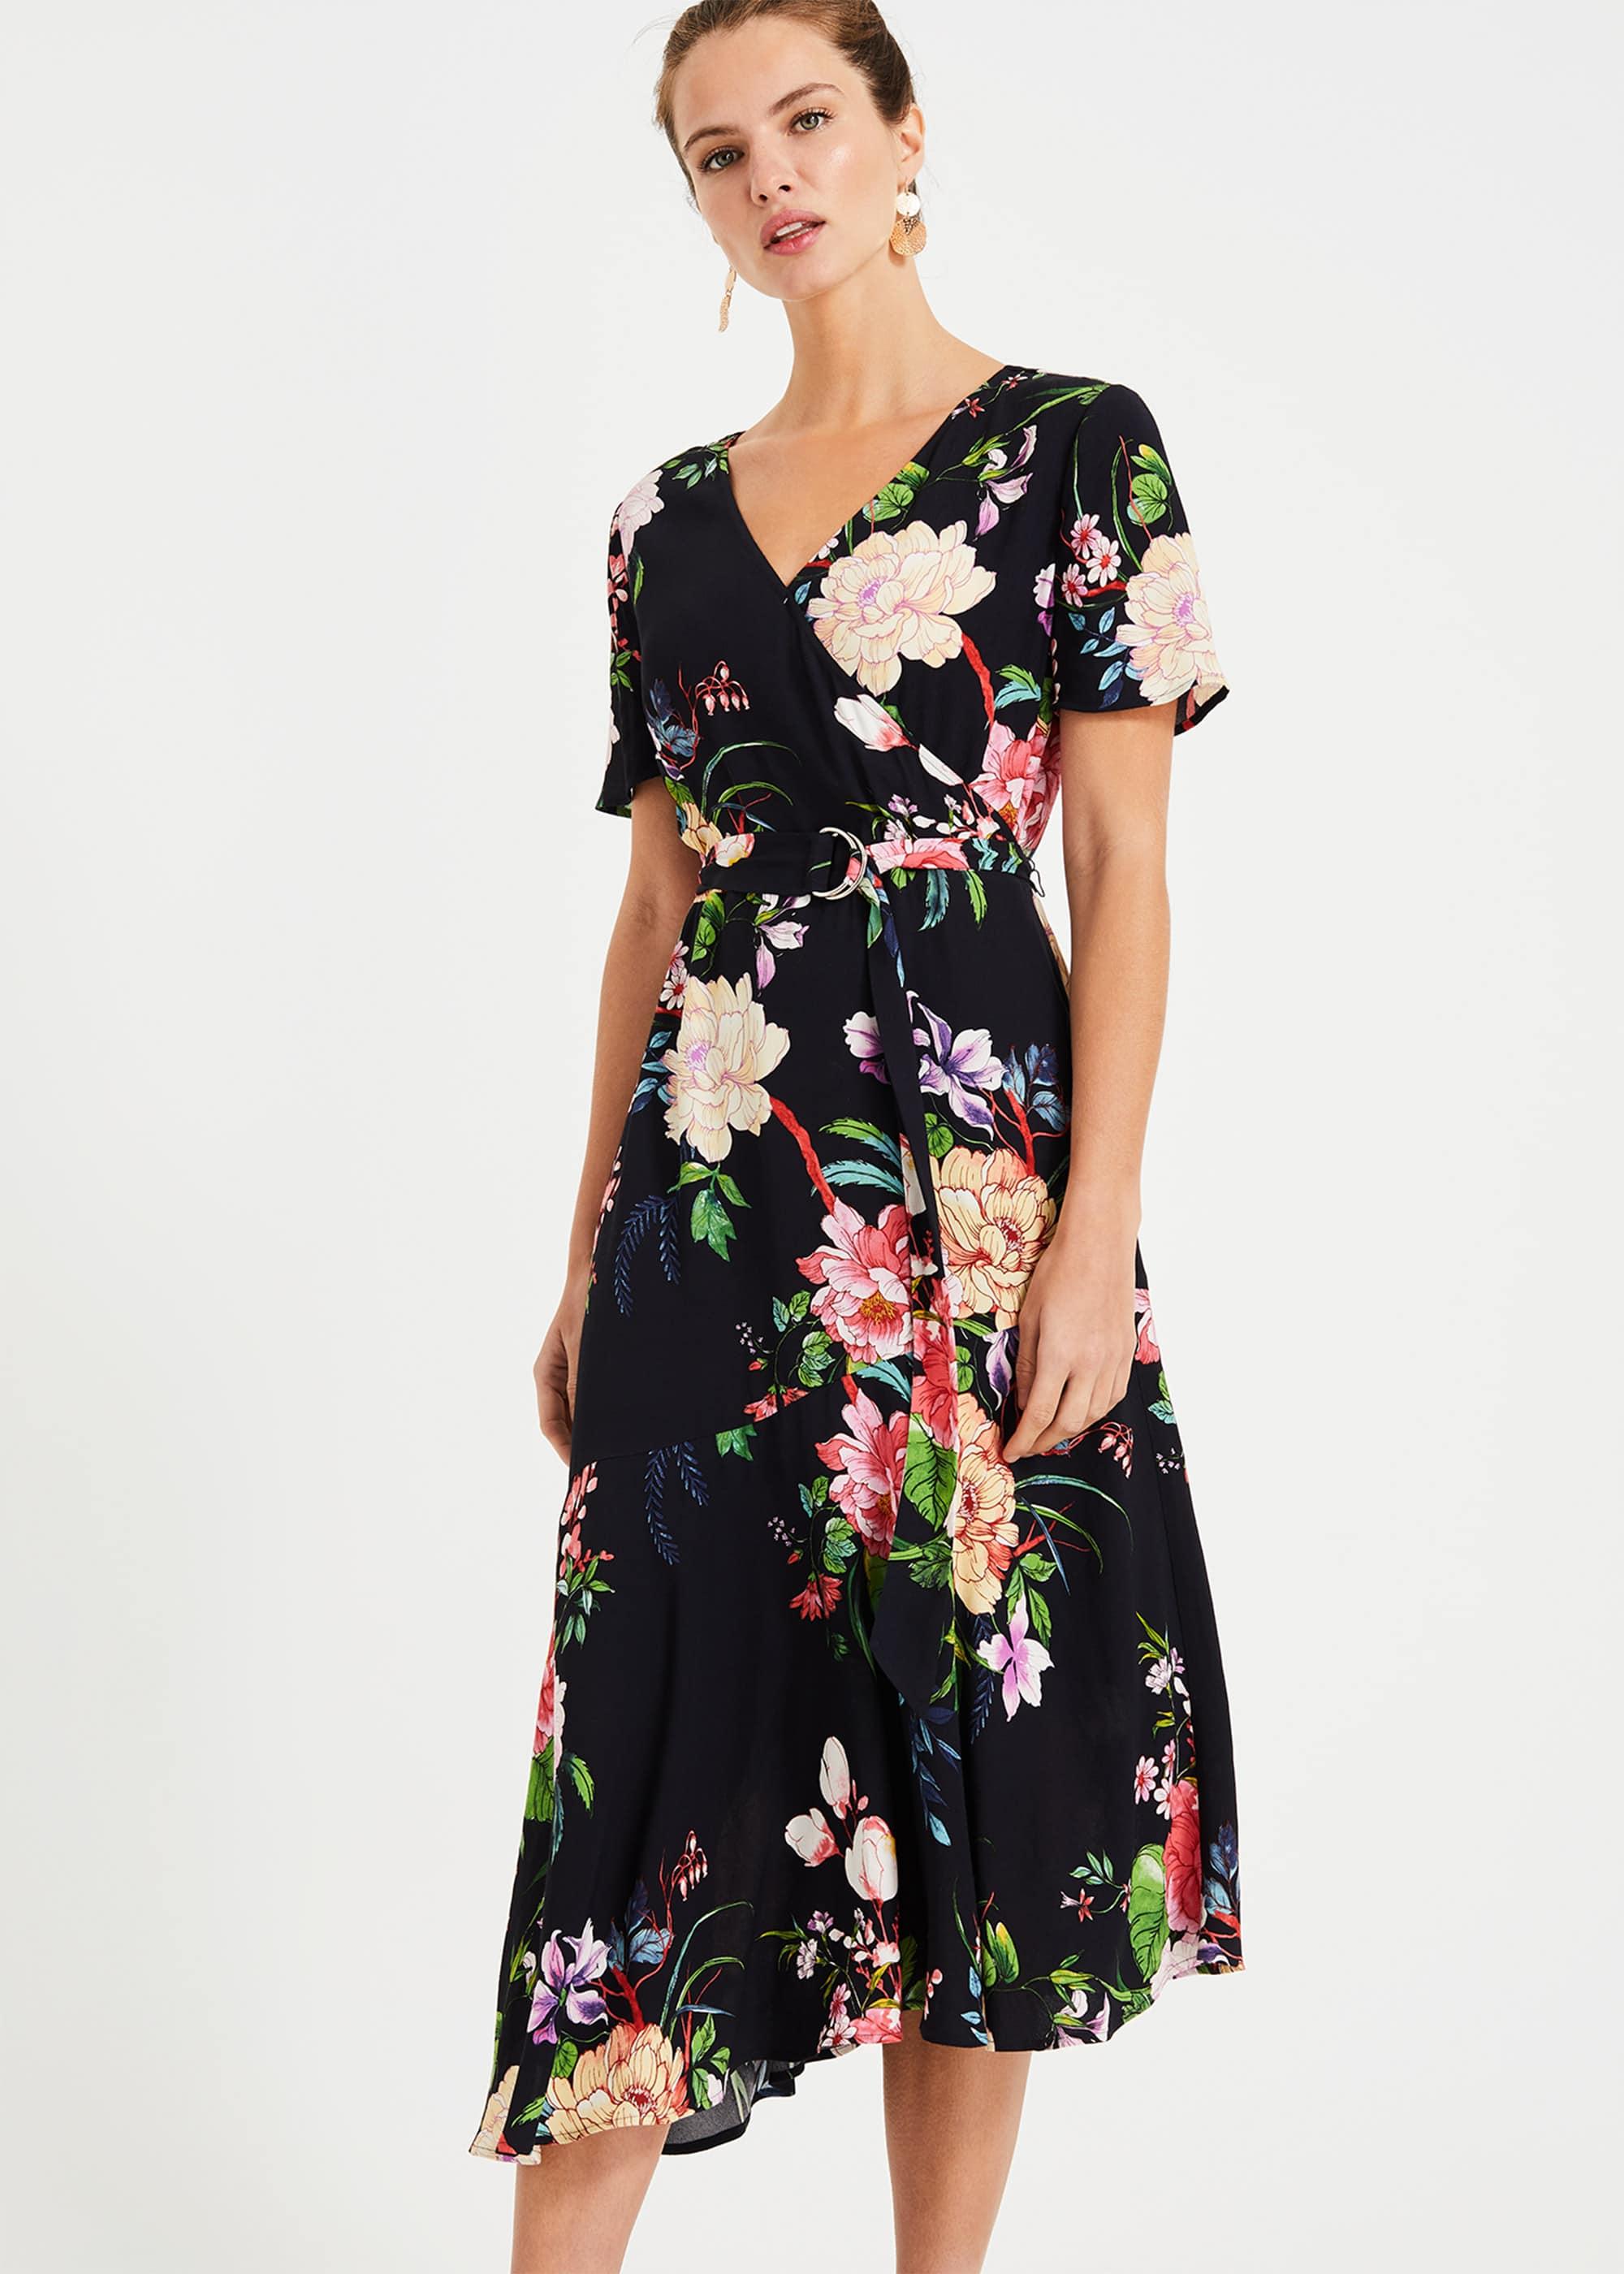 Phase Eight Synthetic 's Evadine-rose Print Dress in Navy/Black (Black) -  Lyst